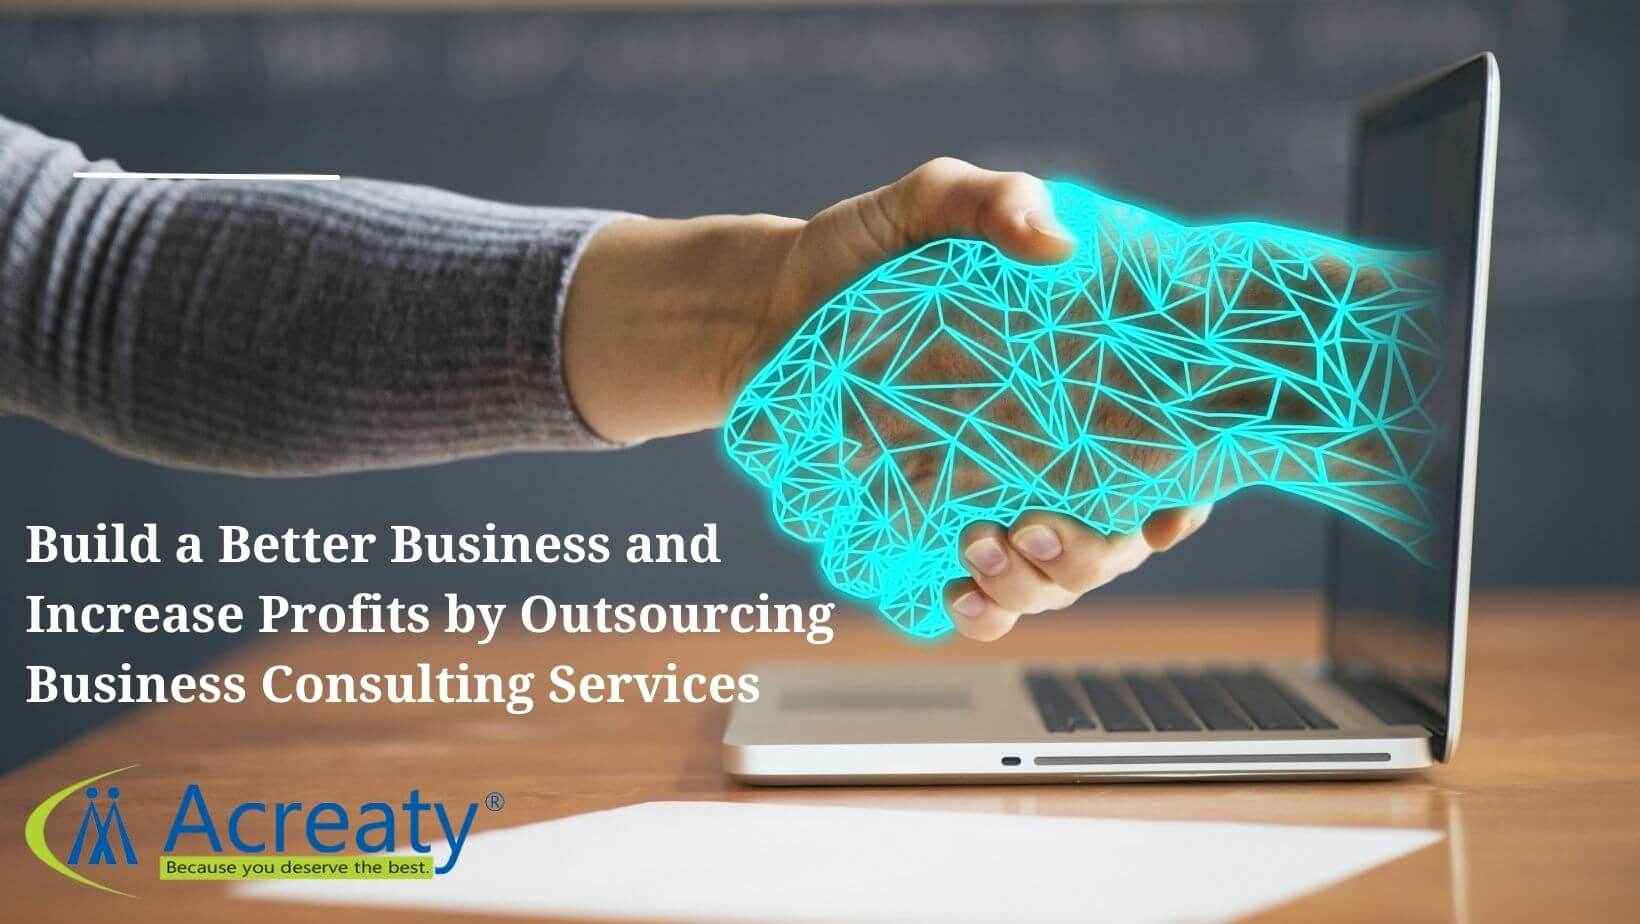 Build a Better Business and Increase Profits by Outsourcing Business Consulting Services